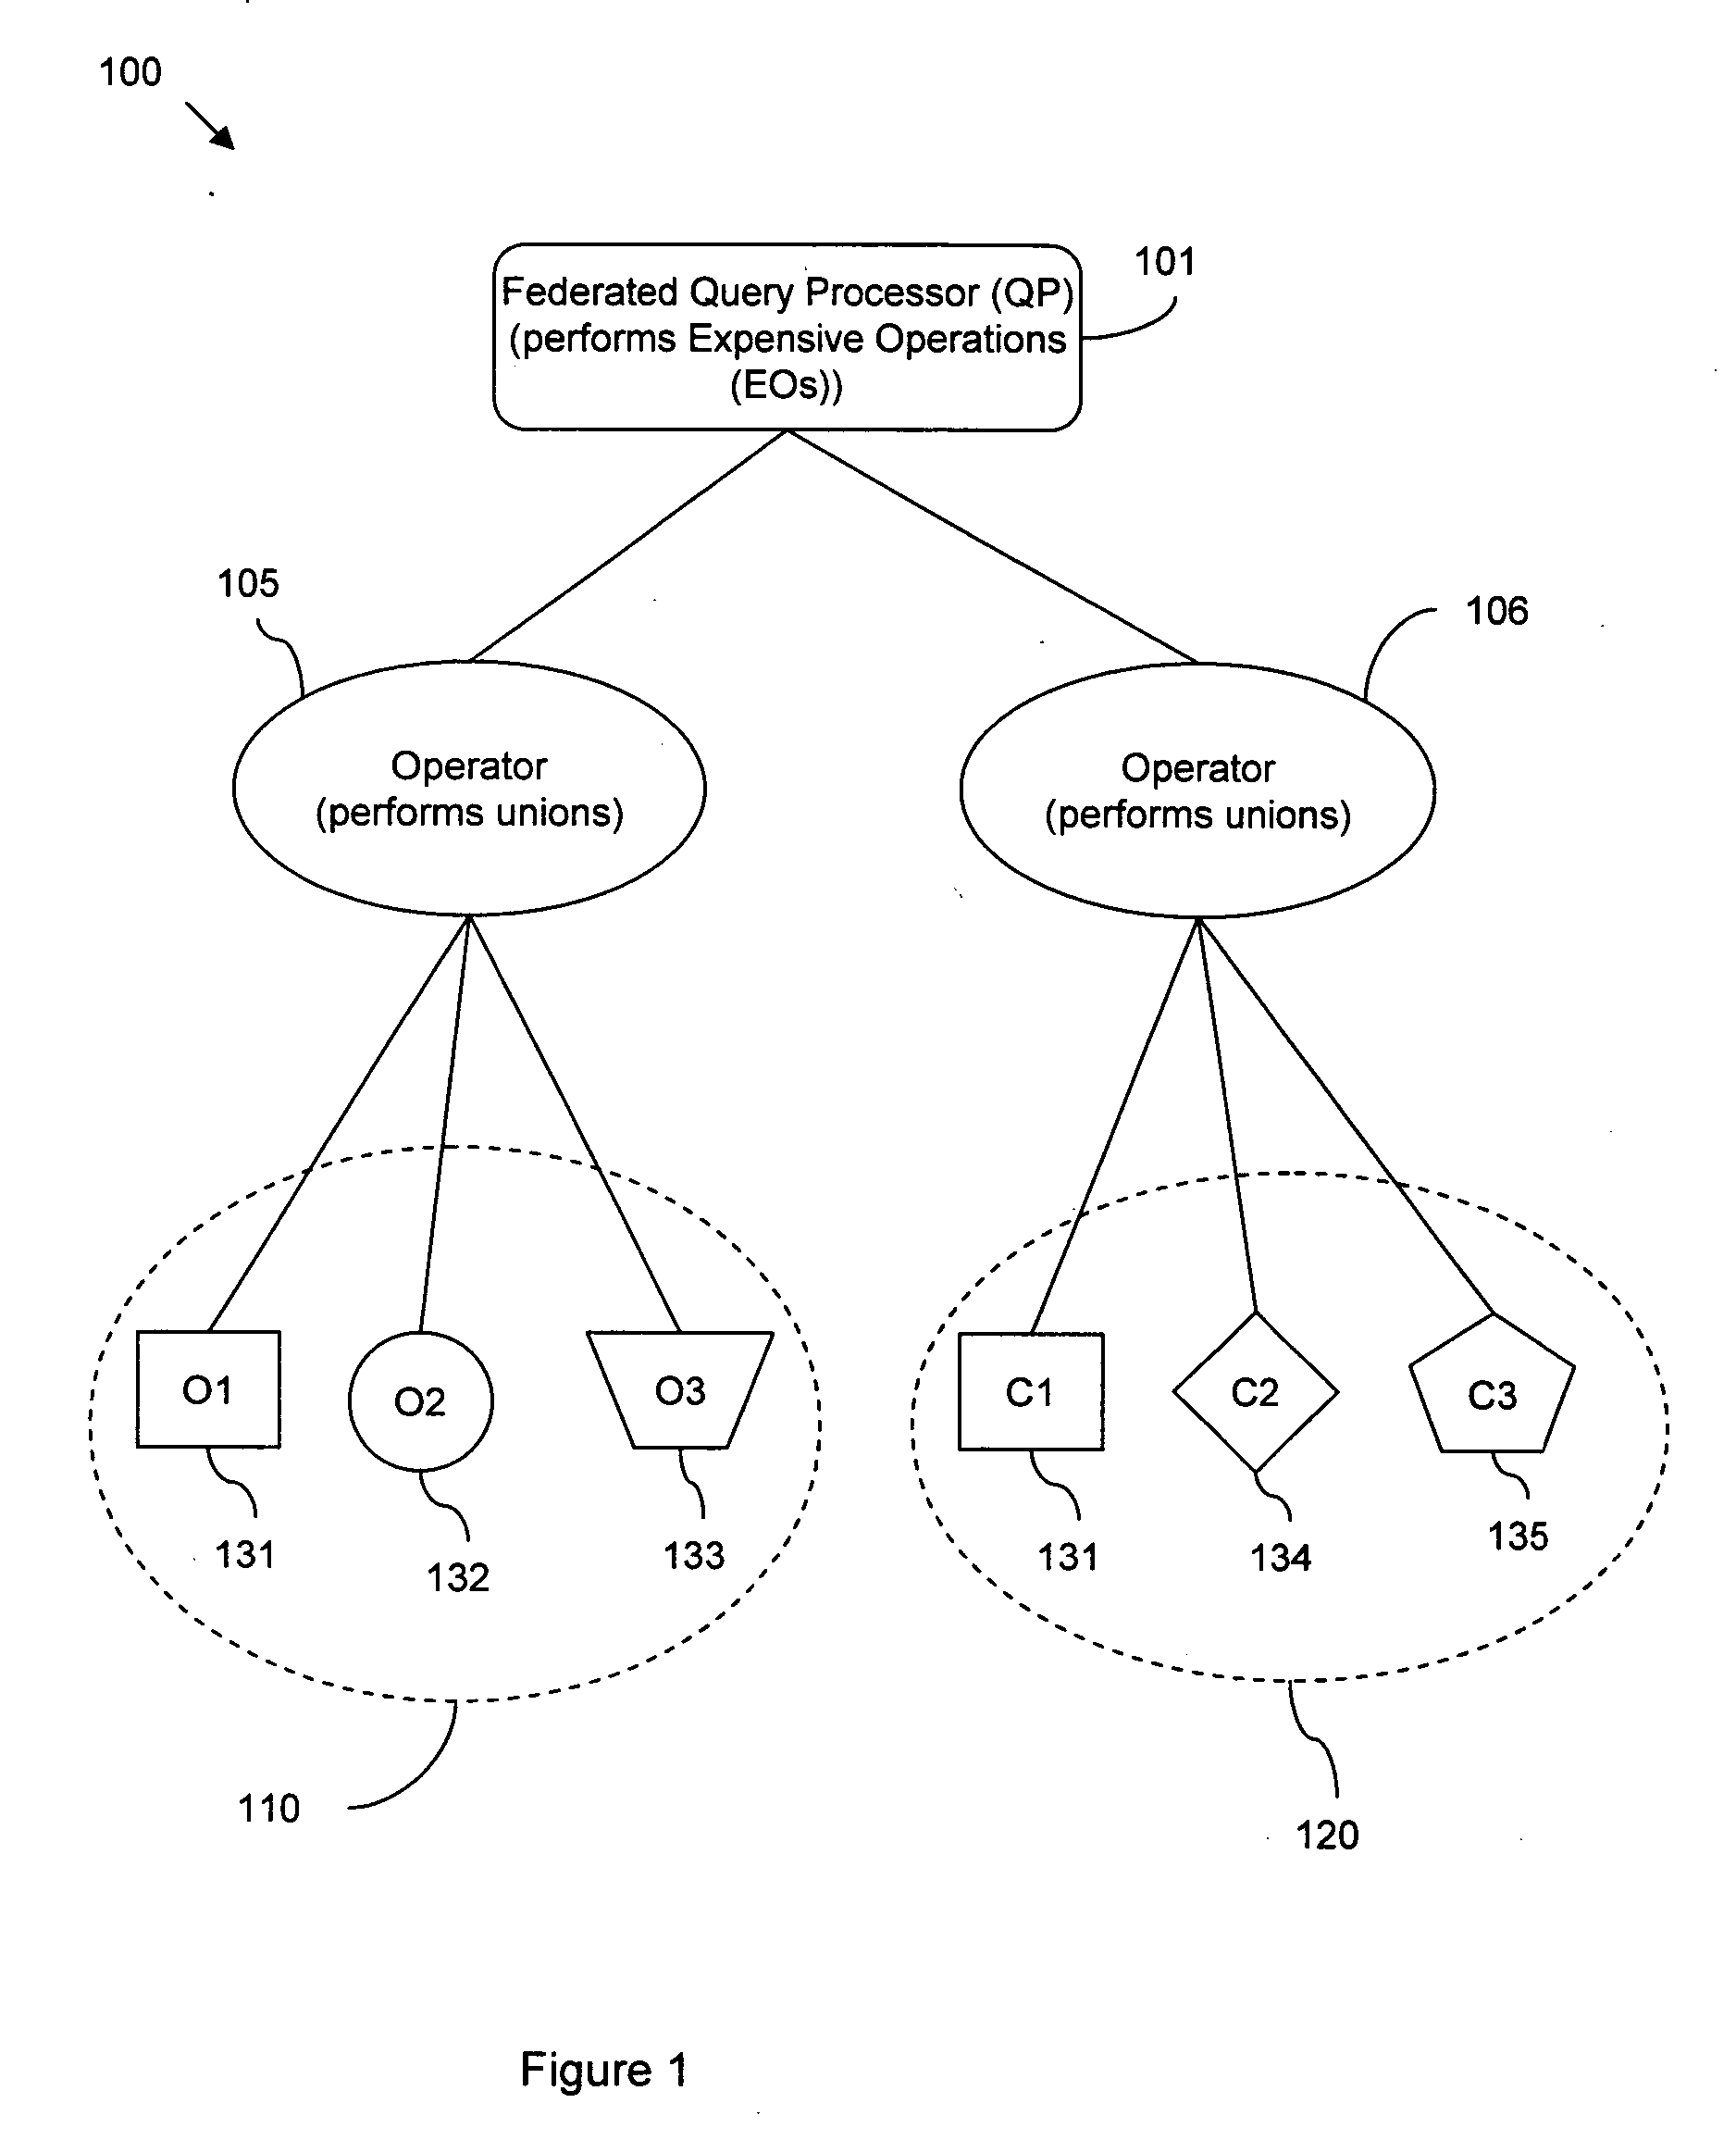 Hybrid push-down/pull-up of unions with expensive operations in a federated query processor